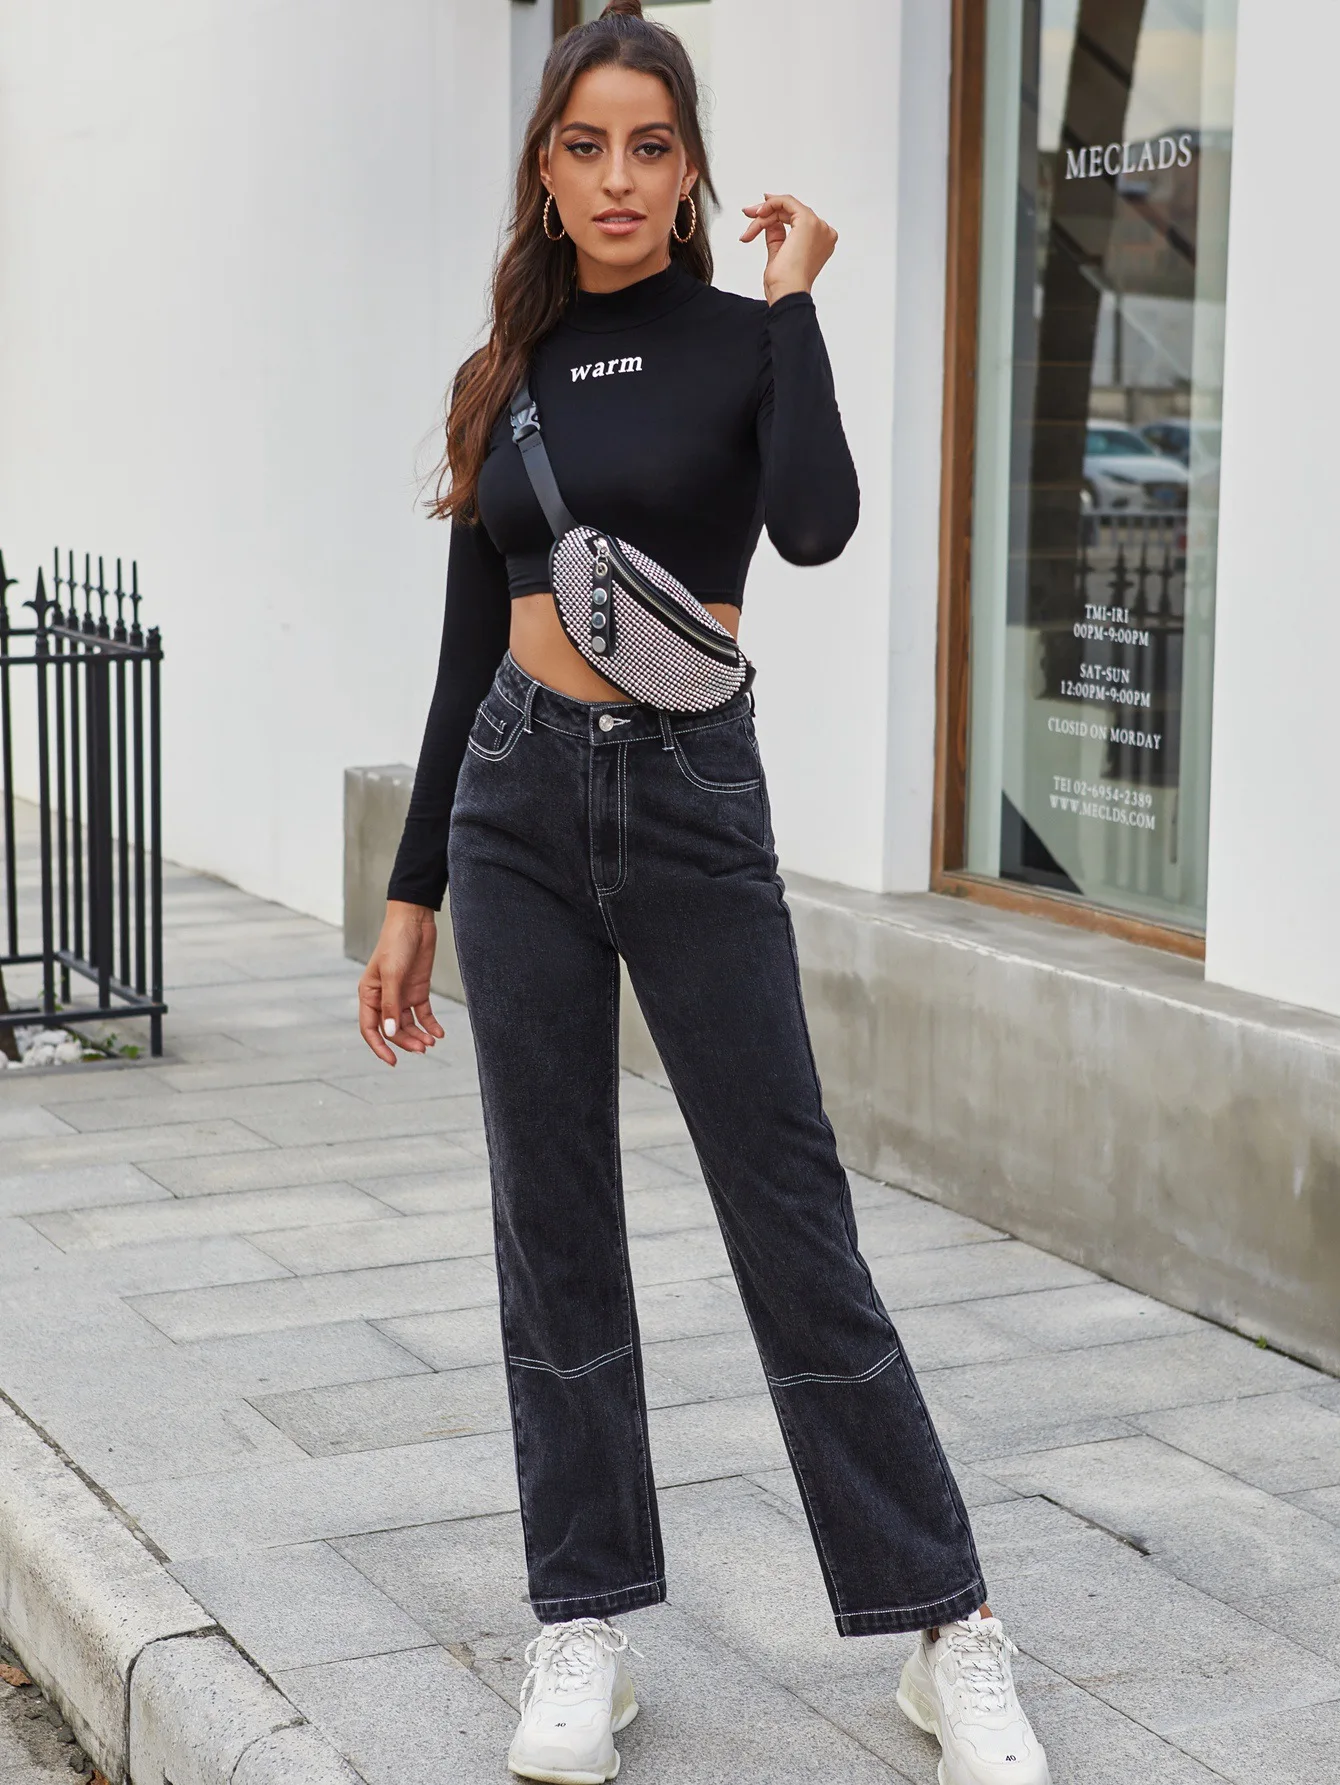 Women's Black Long Denim Pants Laides High Waist Casual Trousers With Side Pockets For All Seasons Slim Fit Jeans